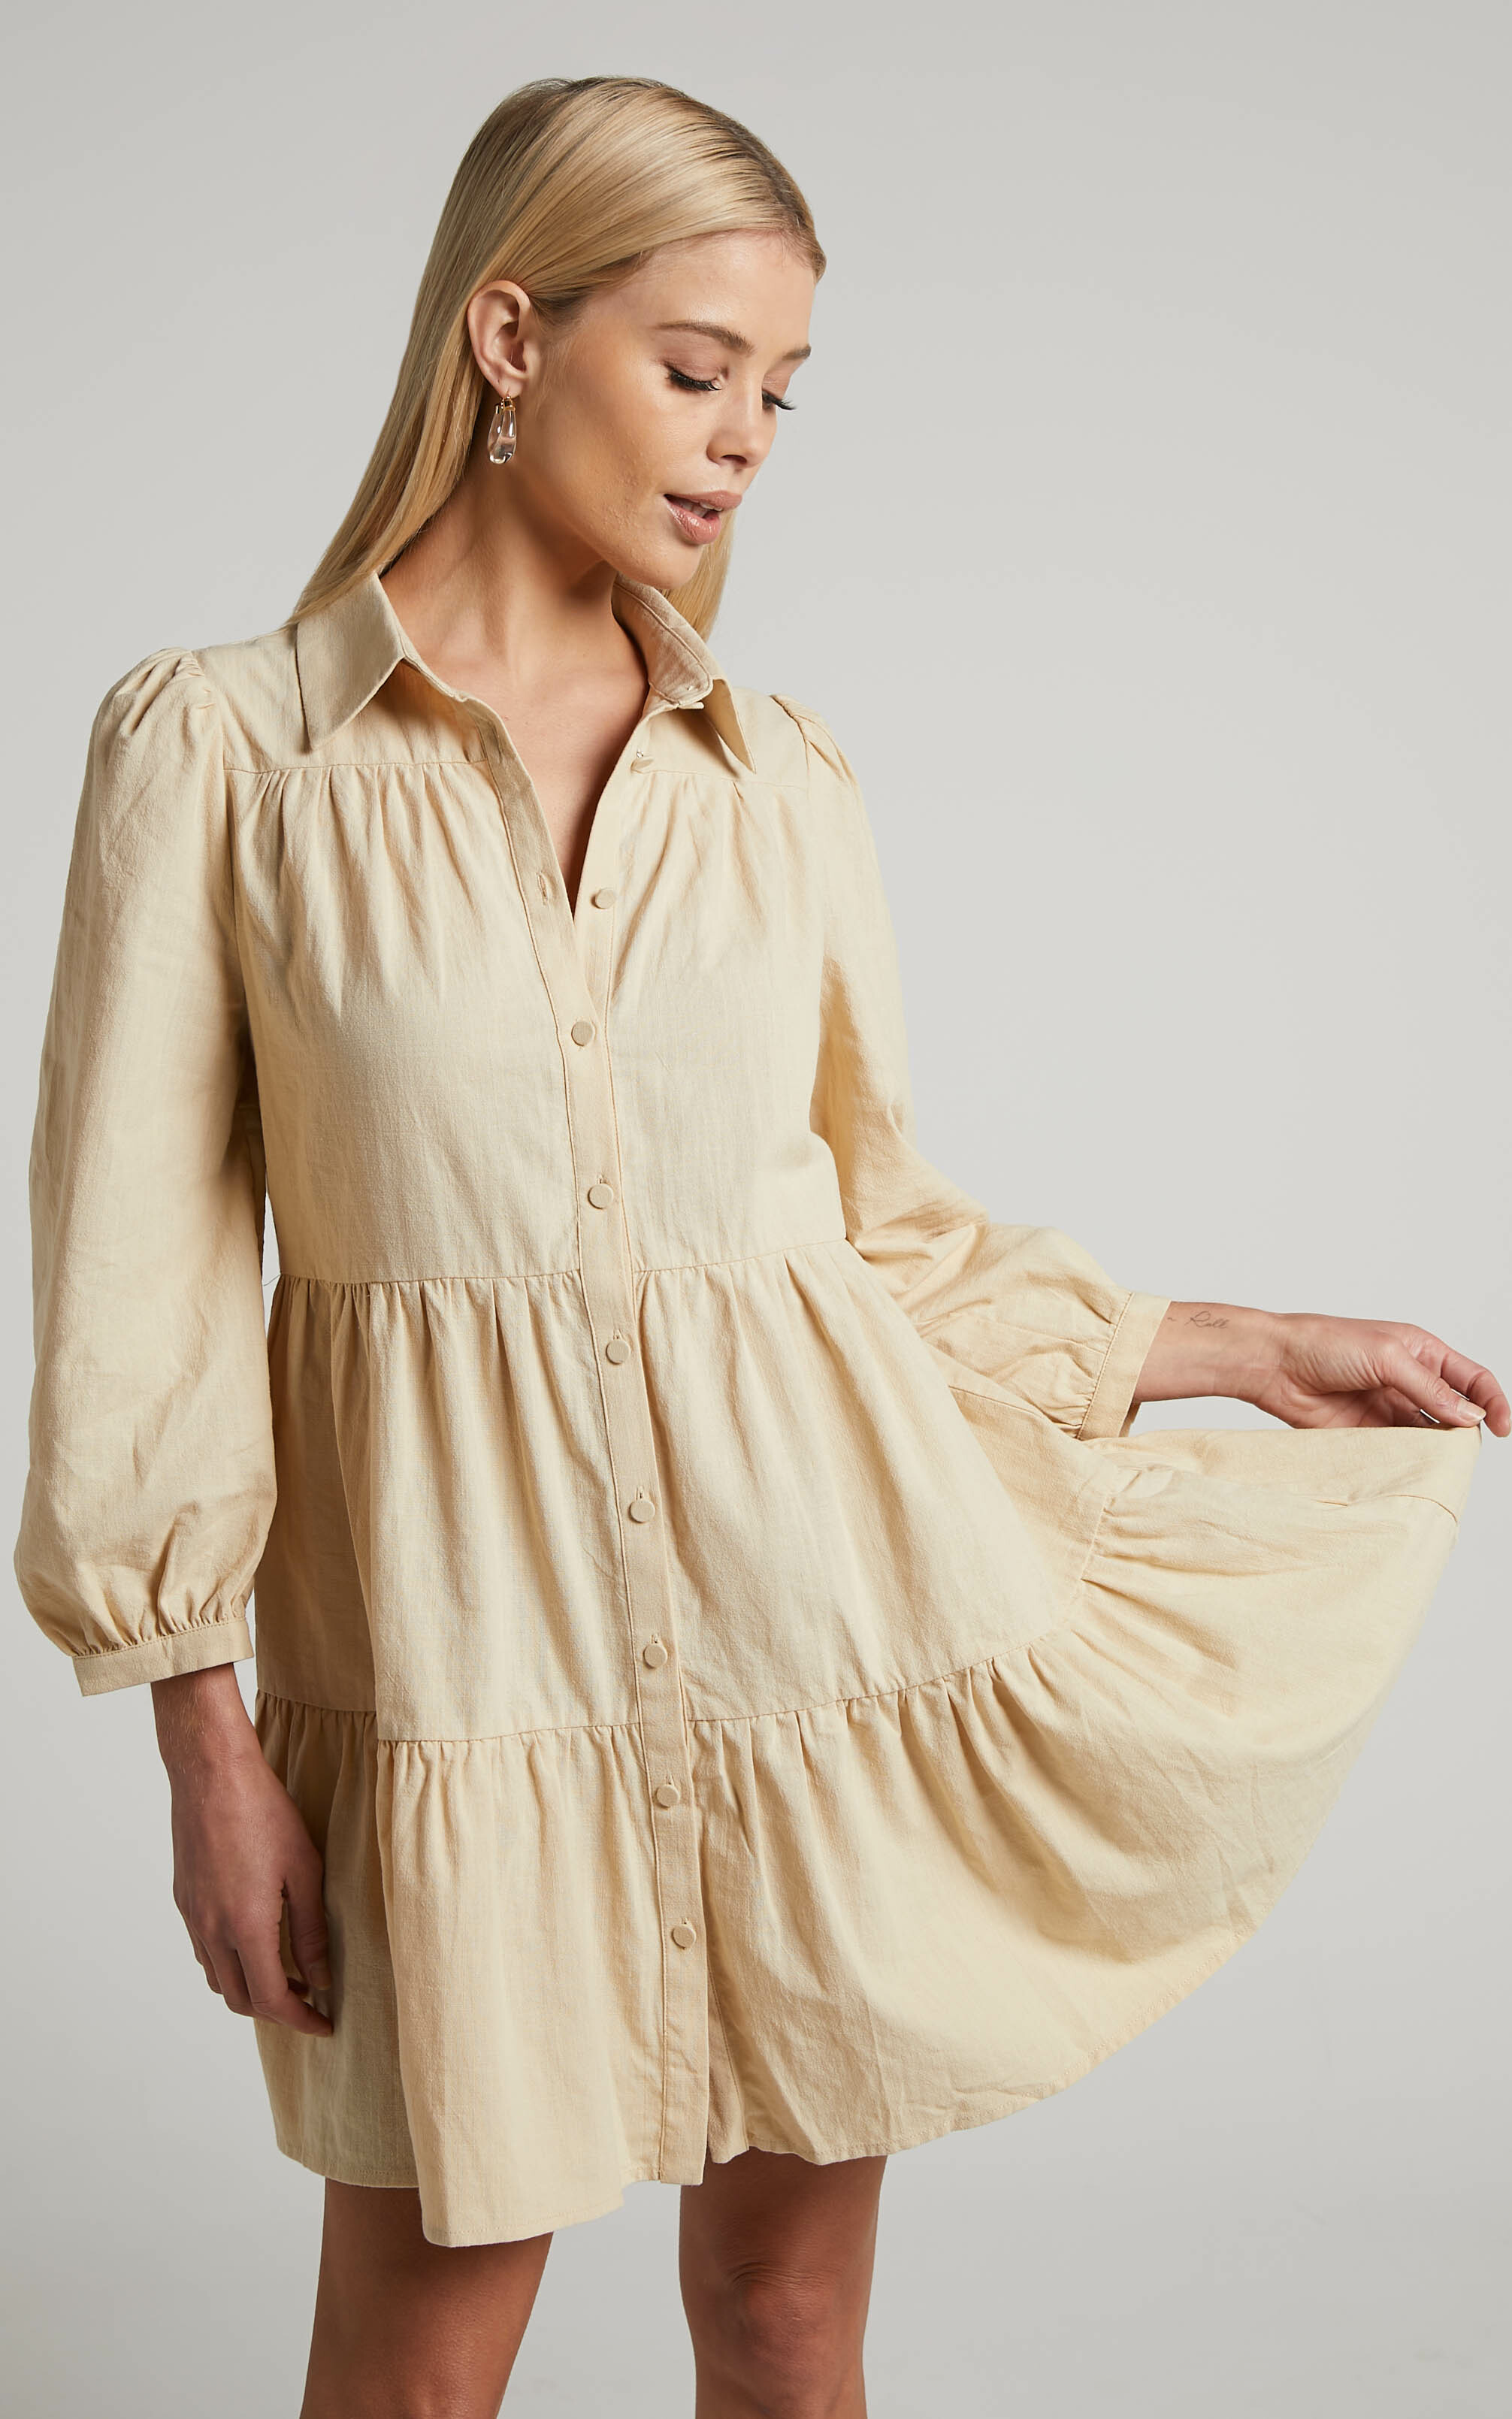 Chalmer Mini Dress - Tiered Long Sleeve Shirt Dress in Sand - 04, NEU1, hi-res image number null